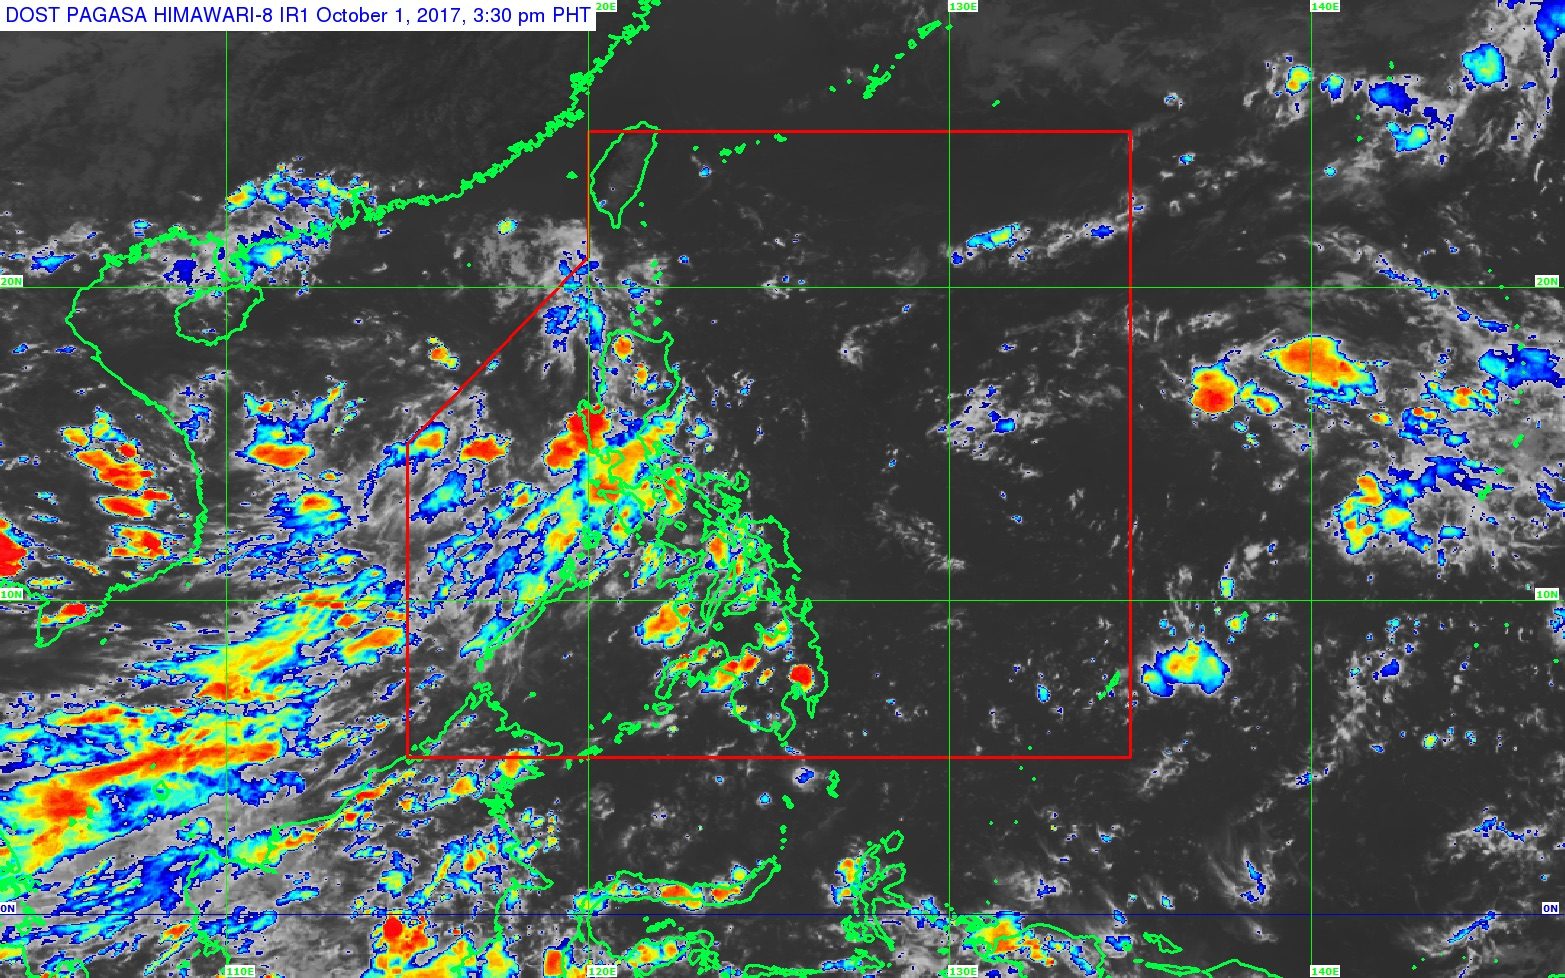 Rain in parts of Luzon on Monday due to ITCZ